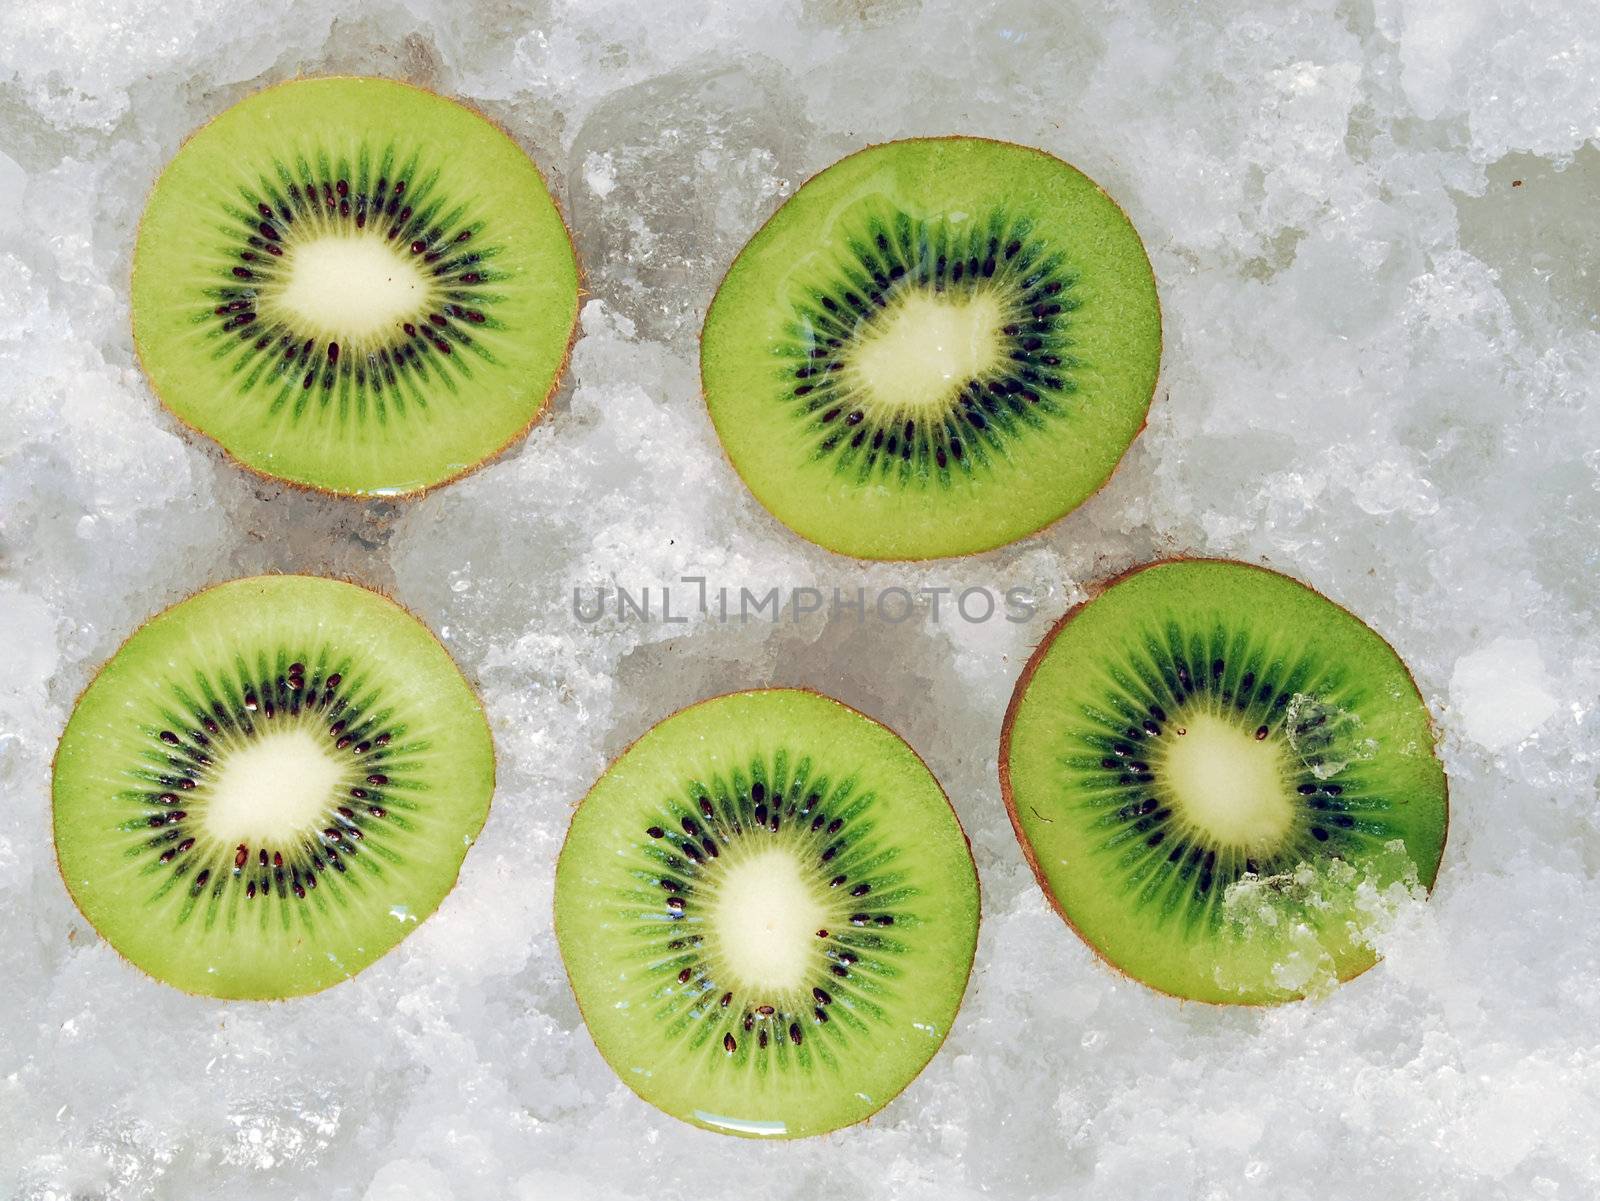 Upper view of five halves fresh fruit on ice cubes. Cut kiwis on ice background